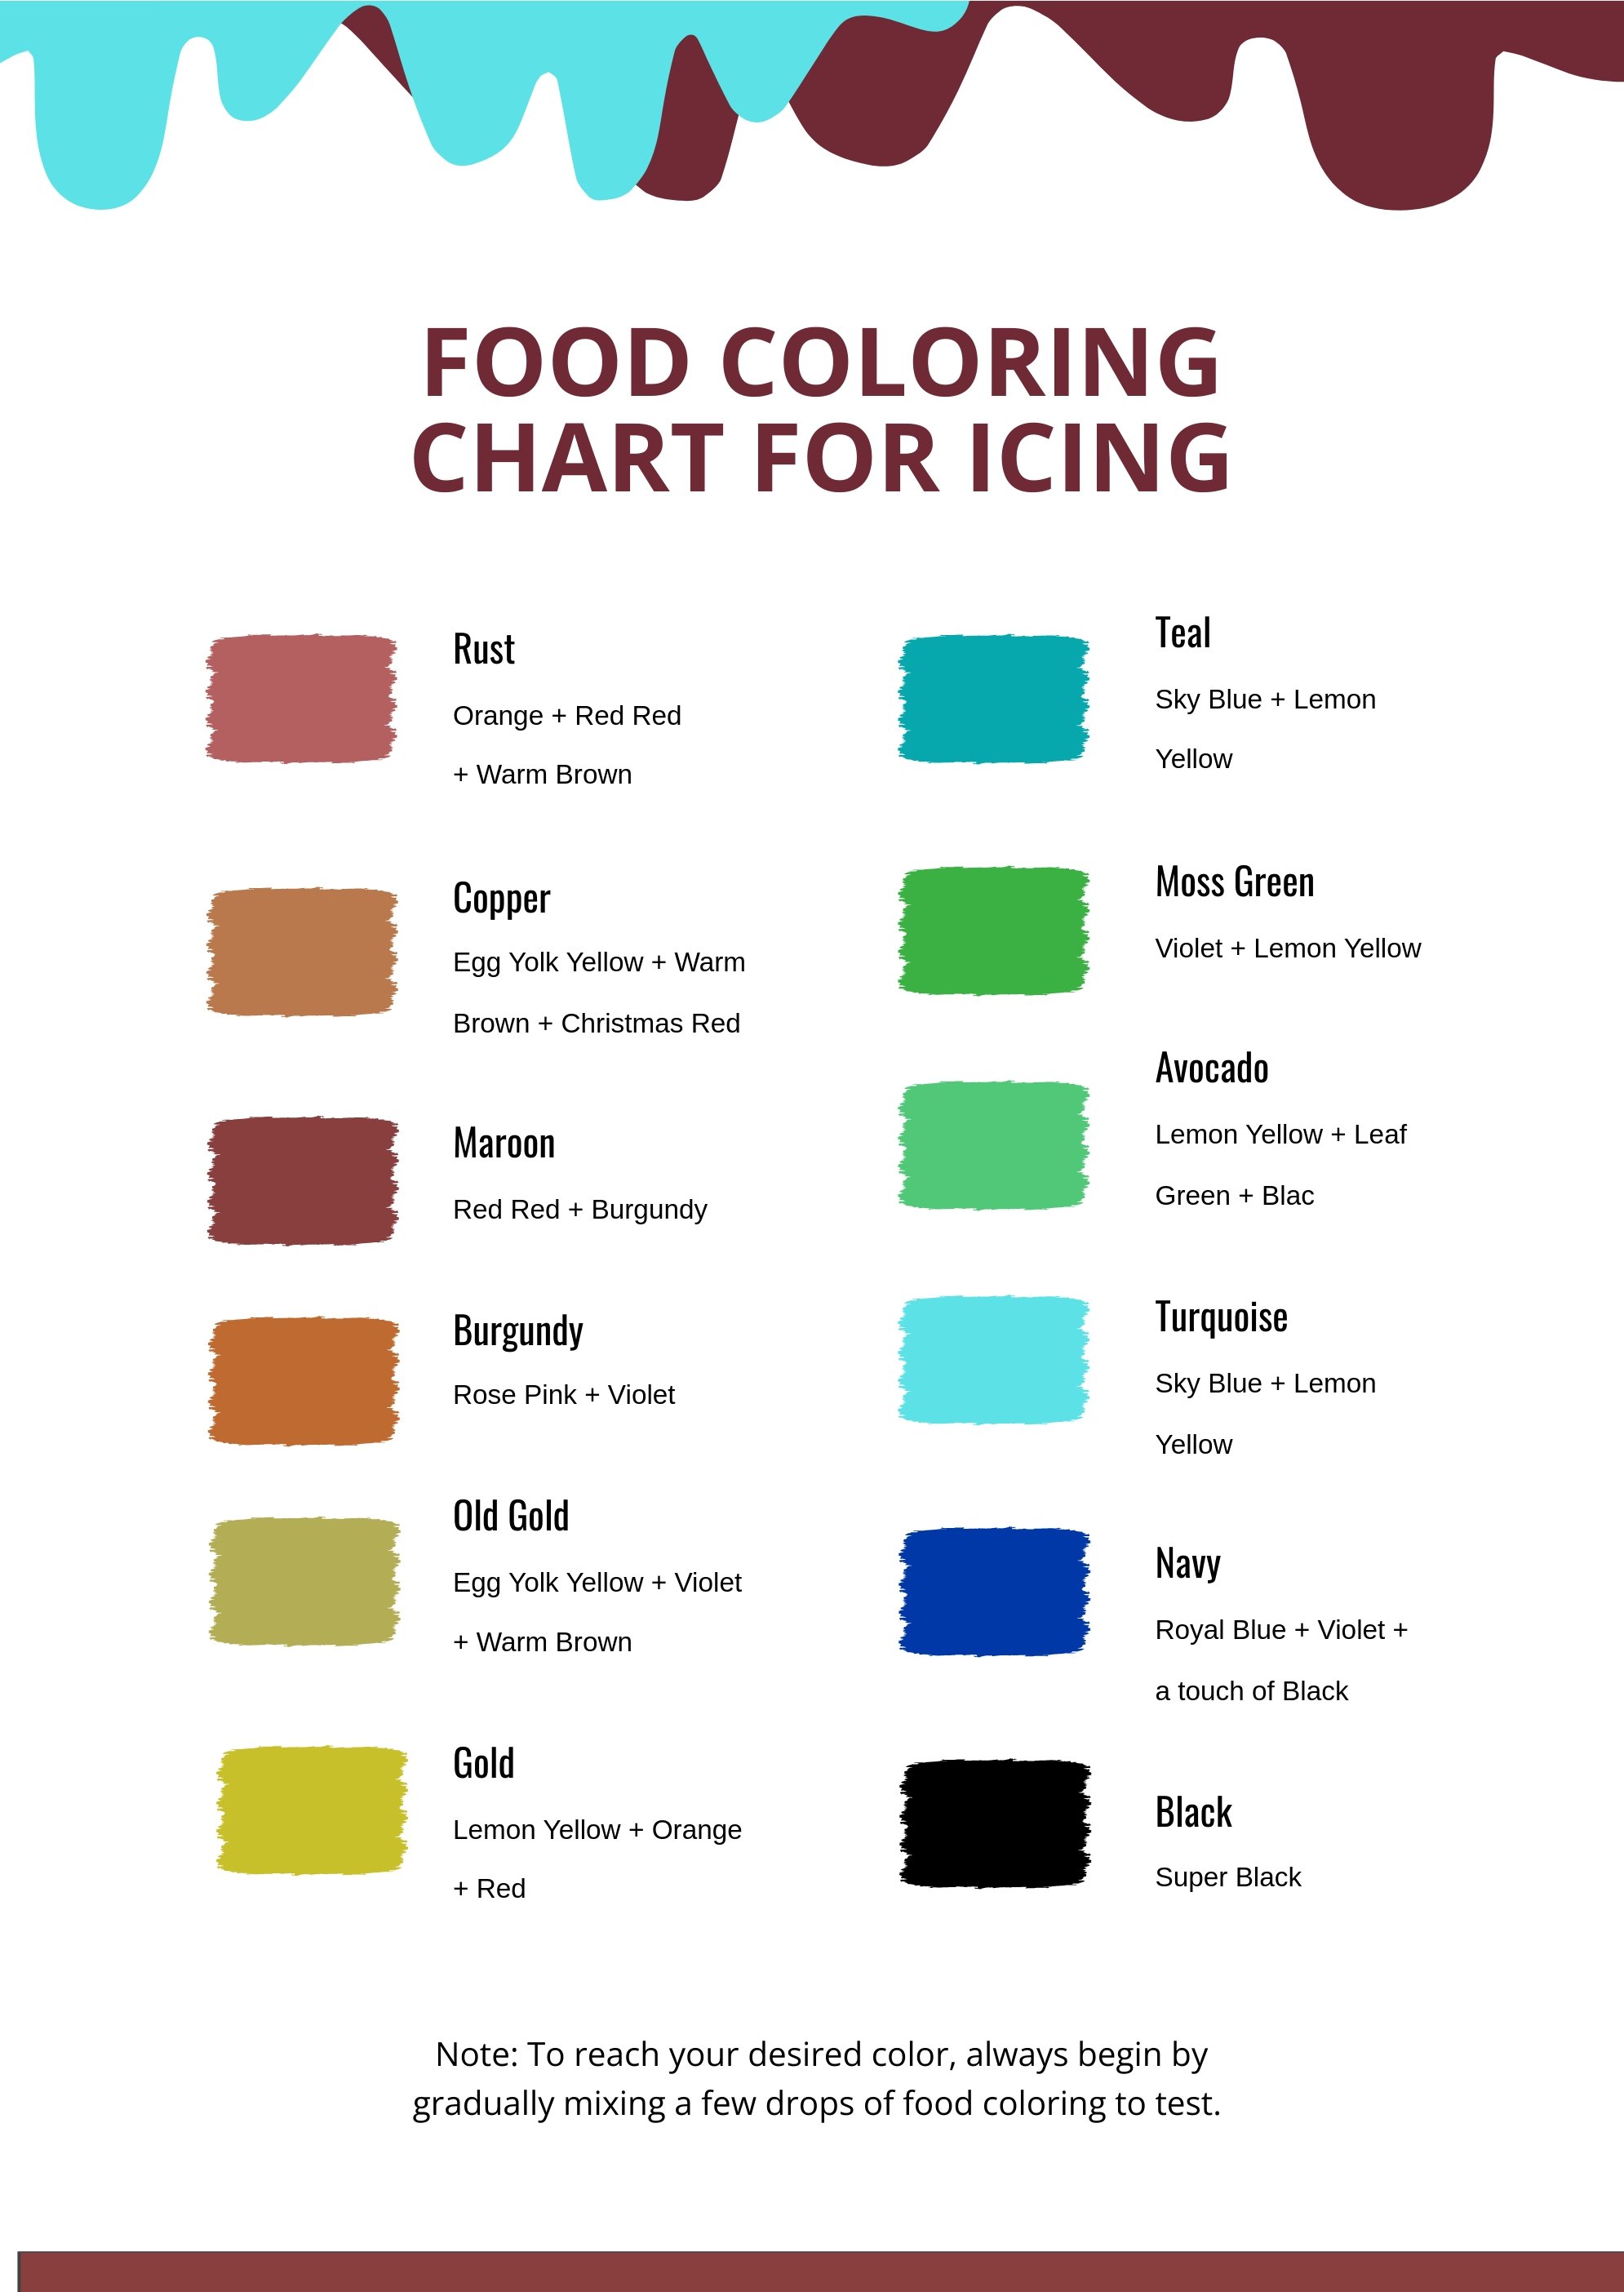 Food Coloring Chart For Icing in PDF, Illustrator